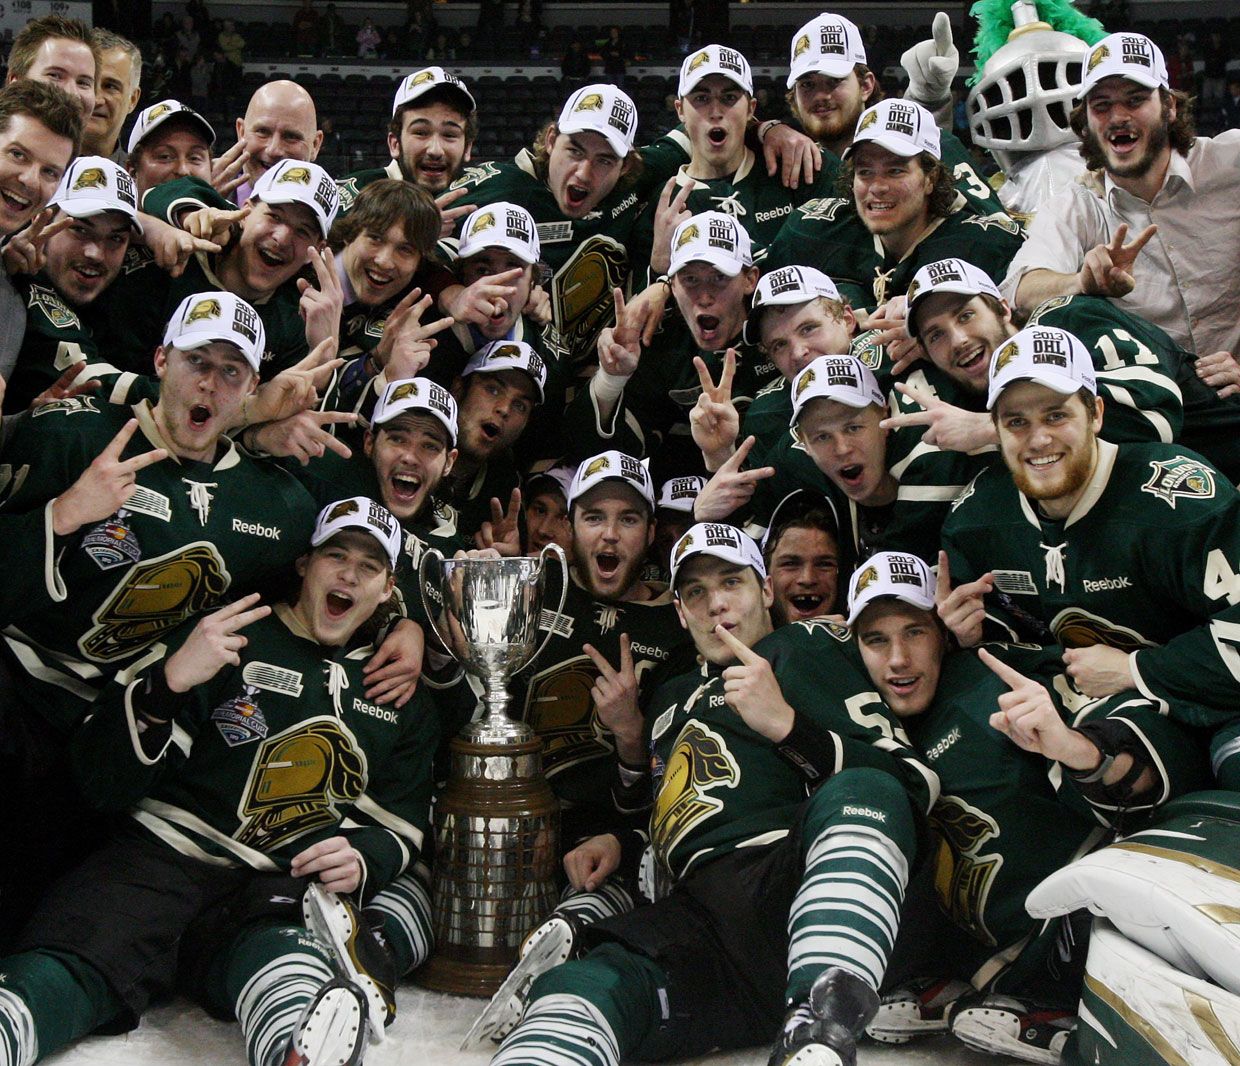 London Knights advance to the OHL Championship